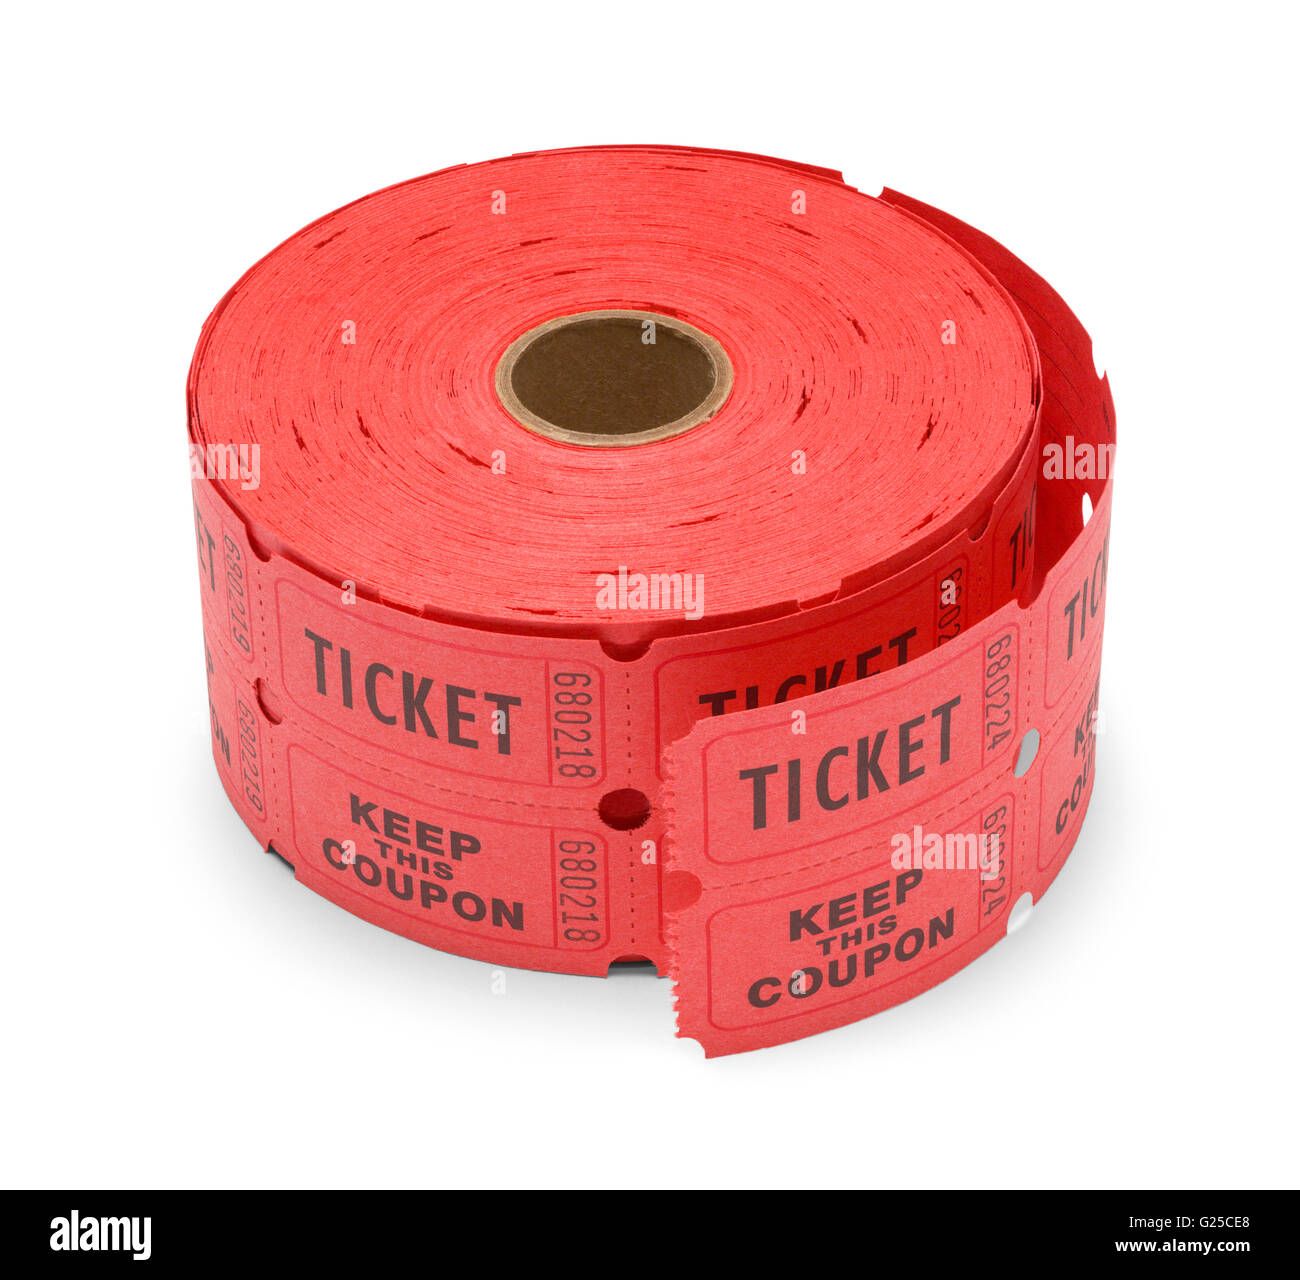 Large Roll of Red Tickets Isolated on White Background. Stock Photo